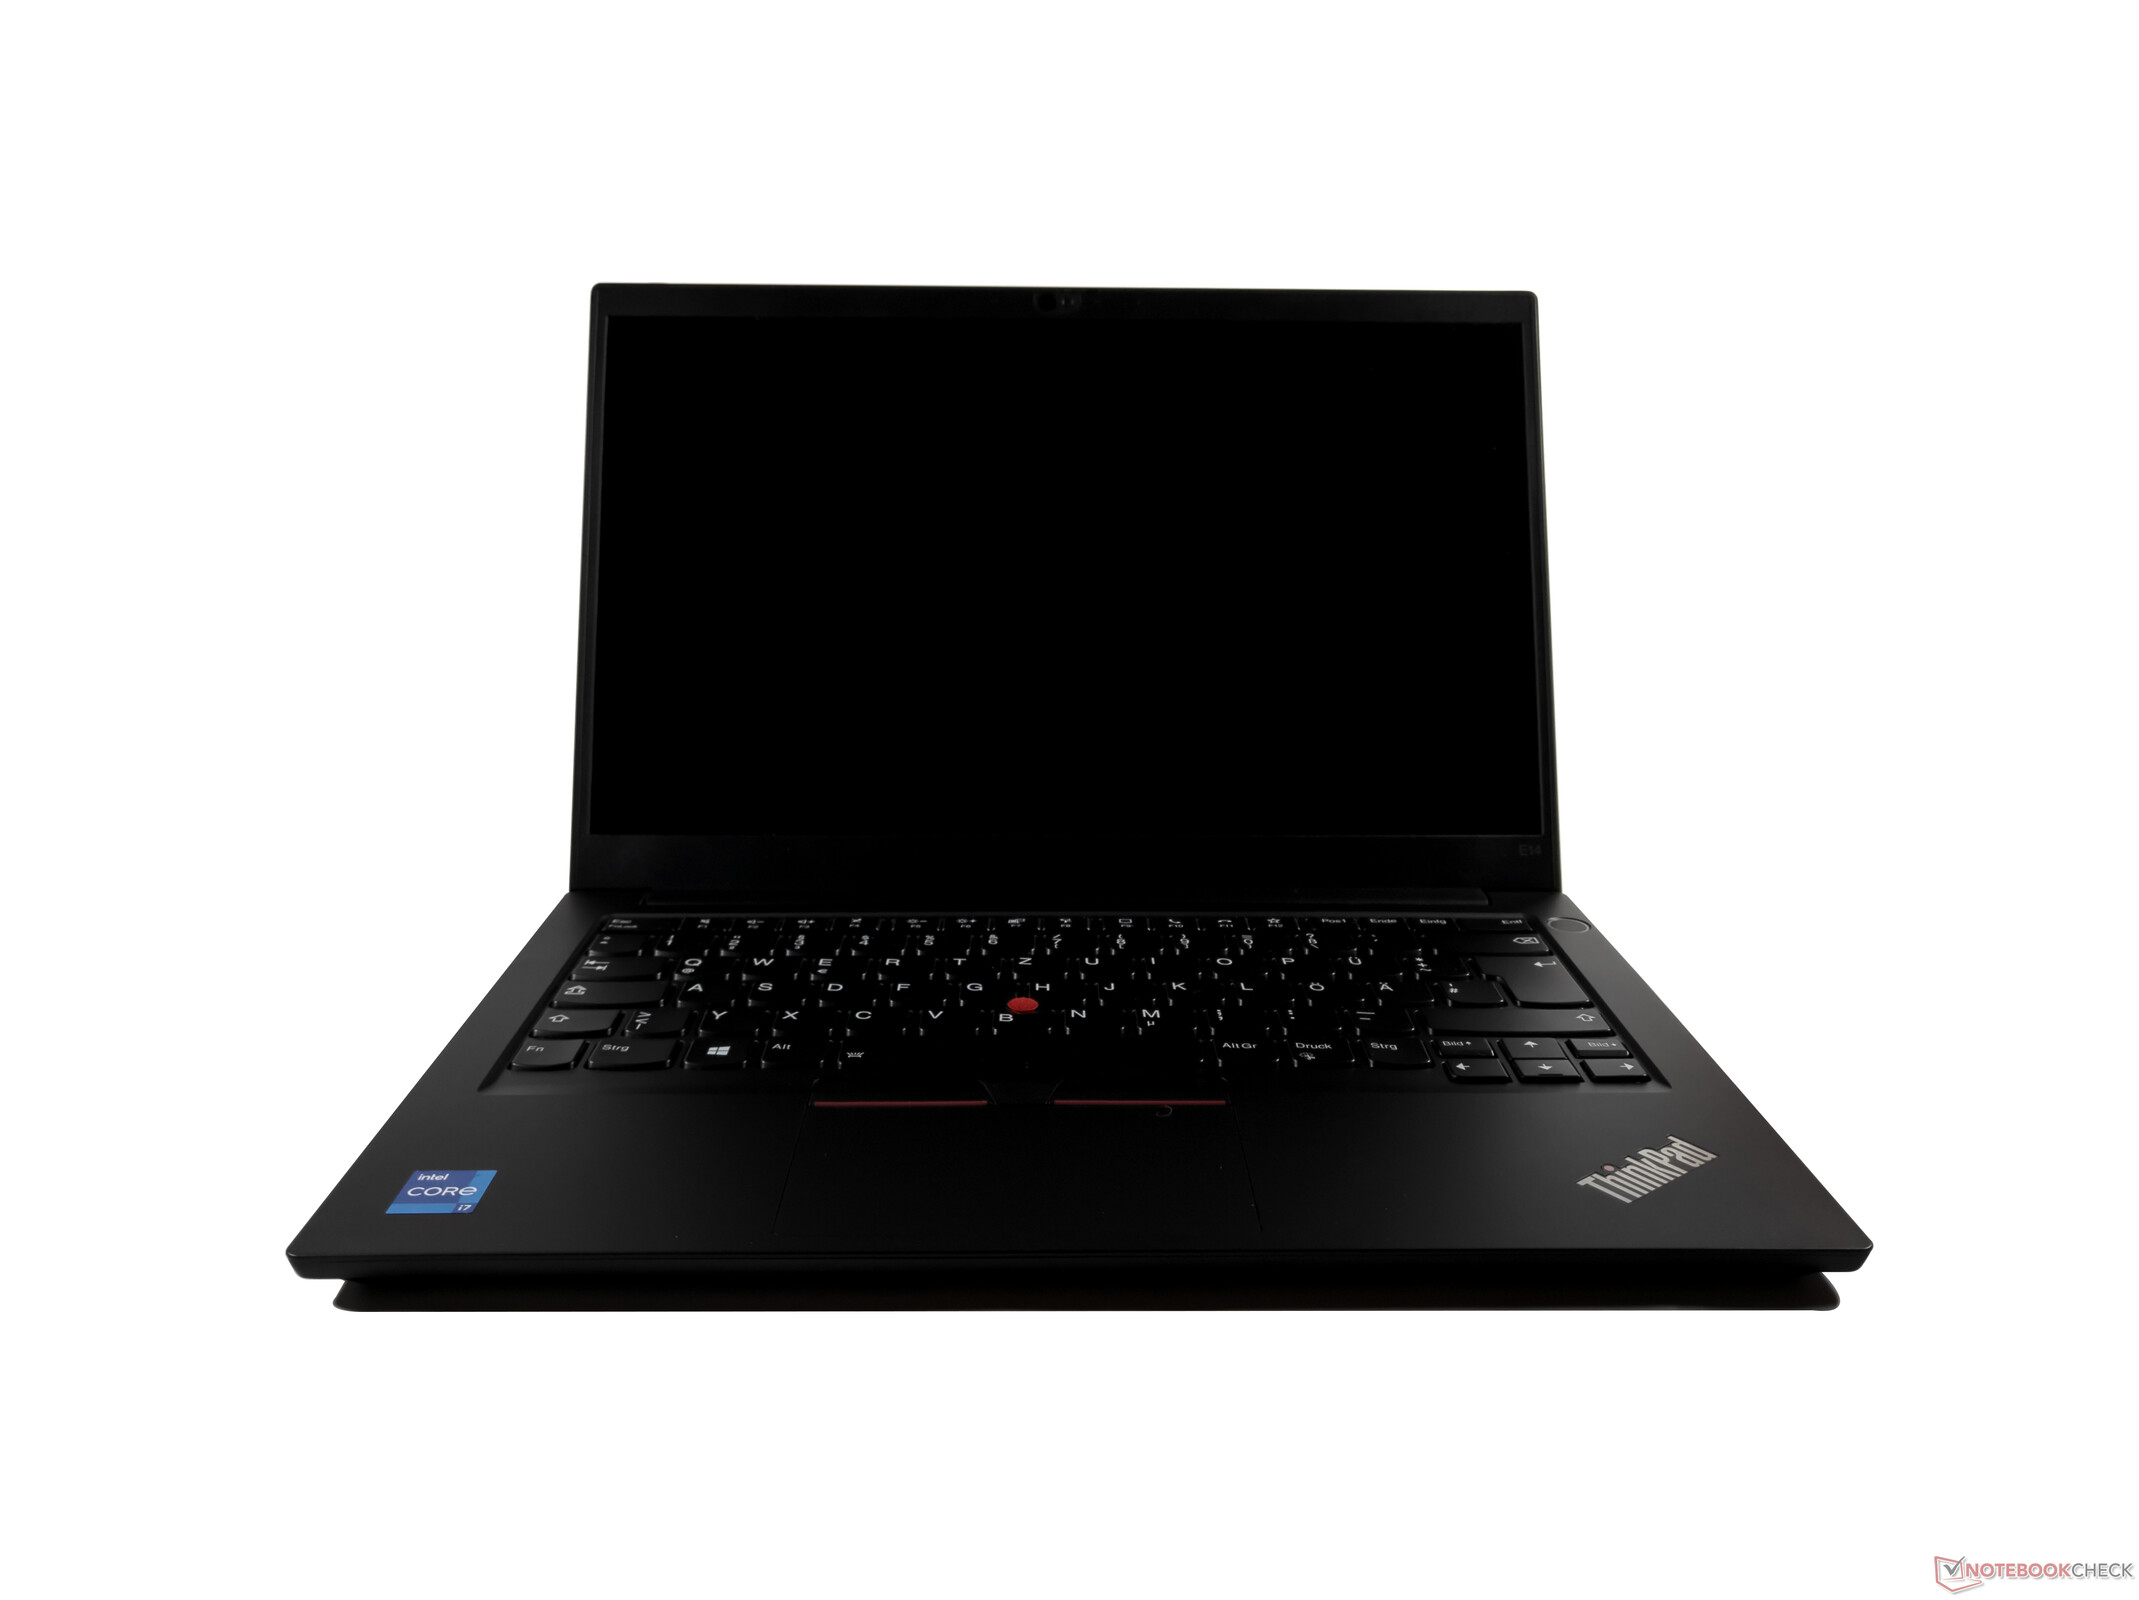 Lenovo ThinkPad E14 Gen 2 shows off the potential of Intel Tiger